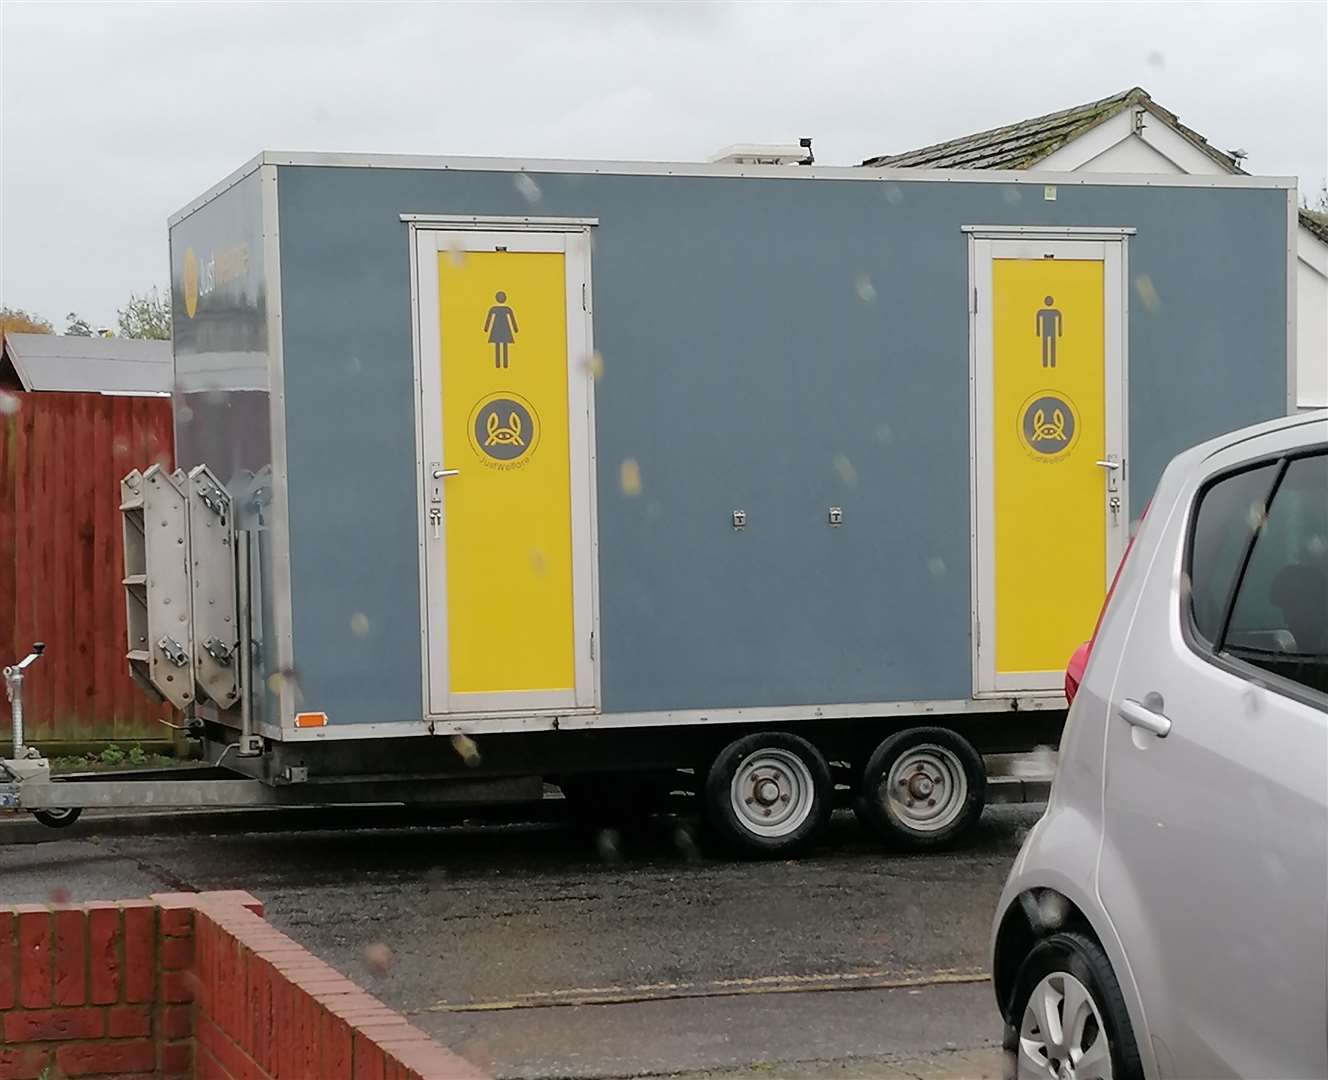 Residents say the portable toilets are "unsuitable" for elderly and vulnerable people